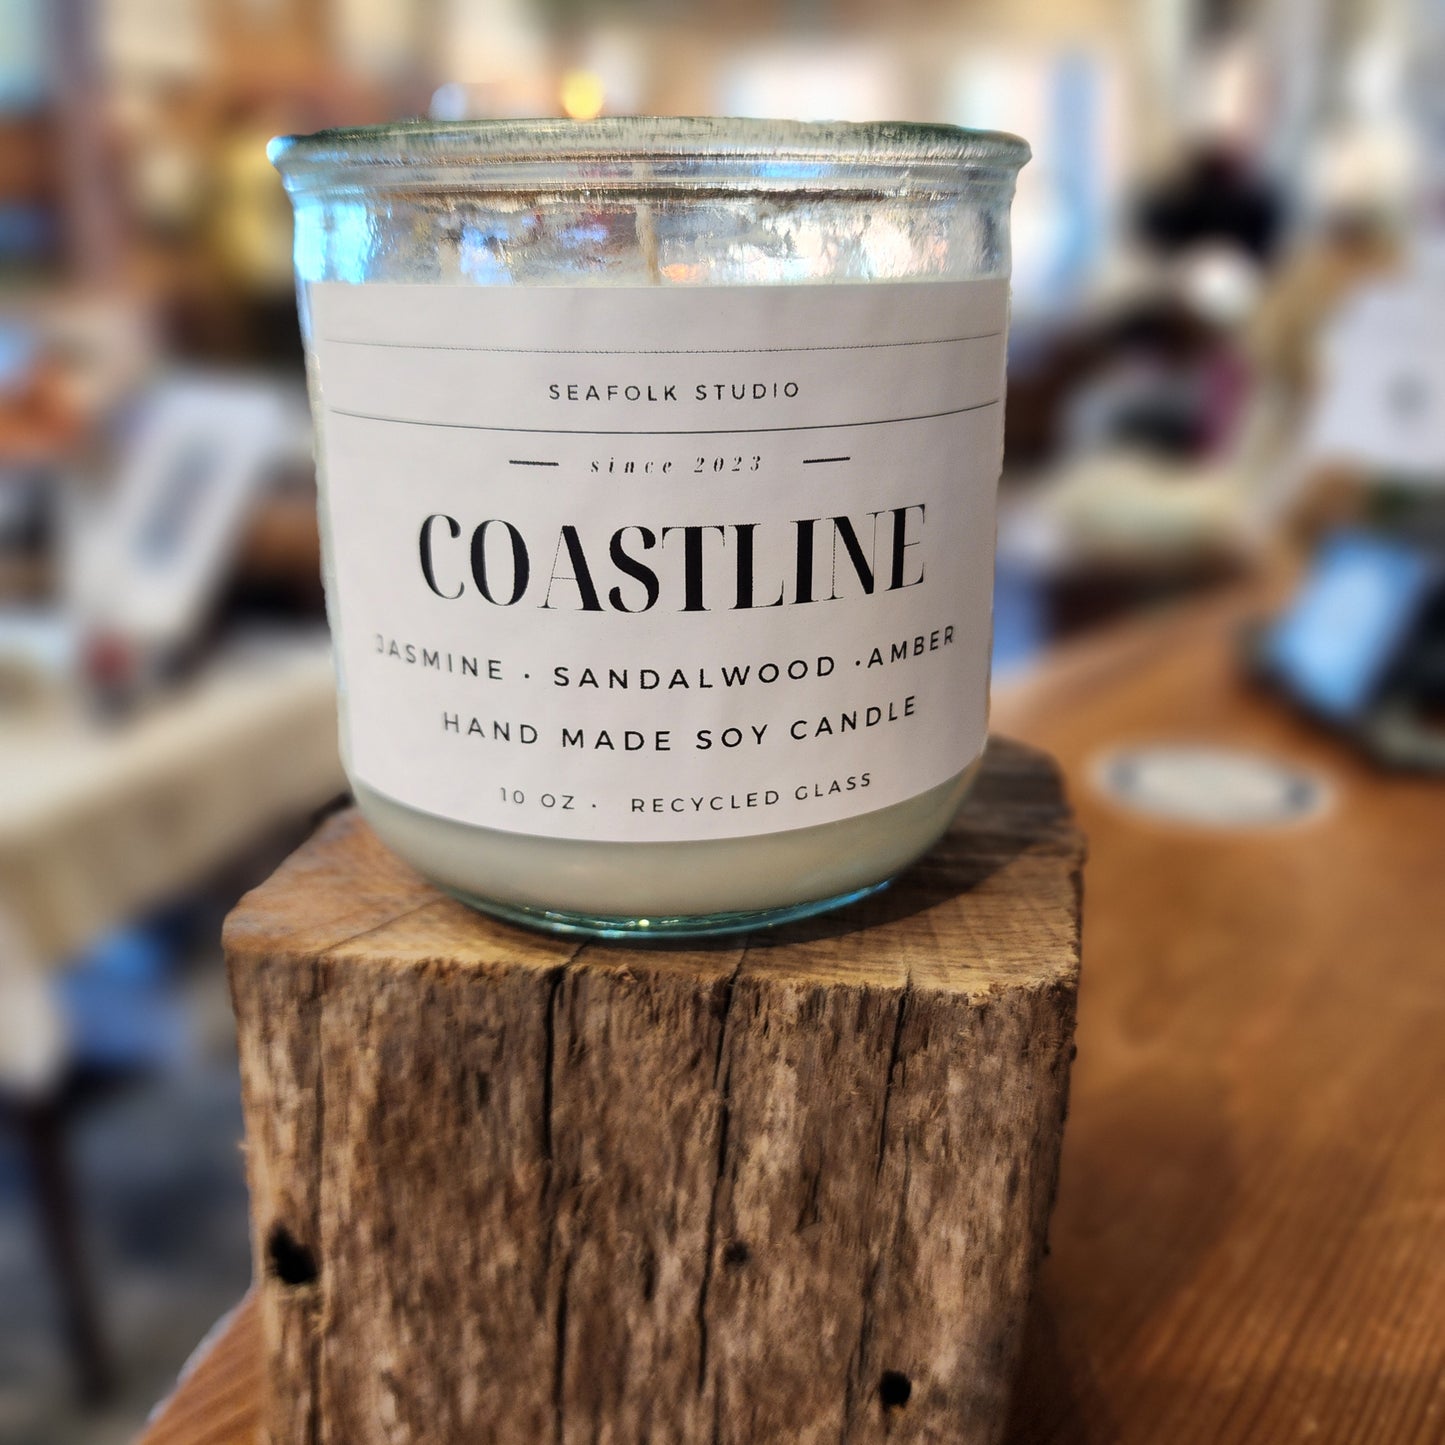 "Coastline" Candle | 10 oz in Recycled Glass